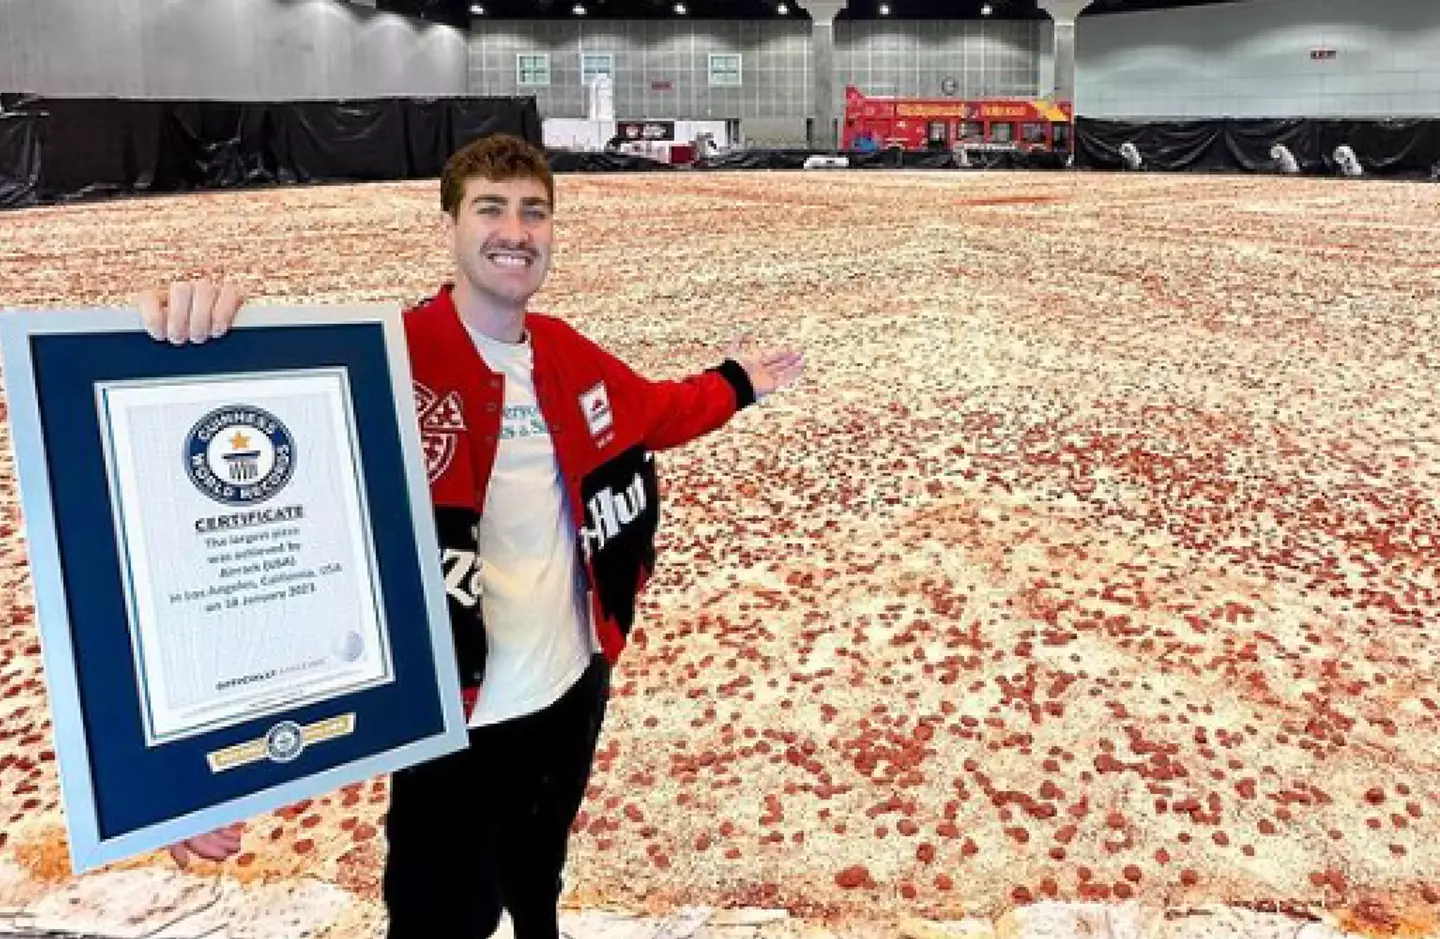 You're looking at the largest pizza ever made, and it certainly didn't go to waste.